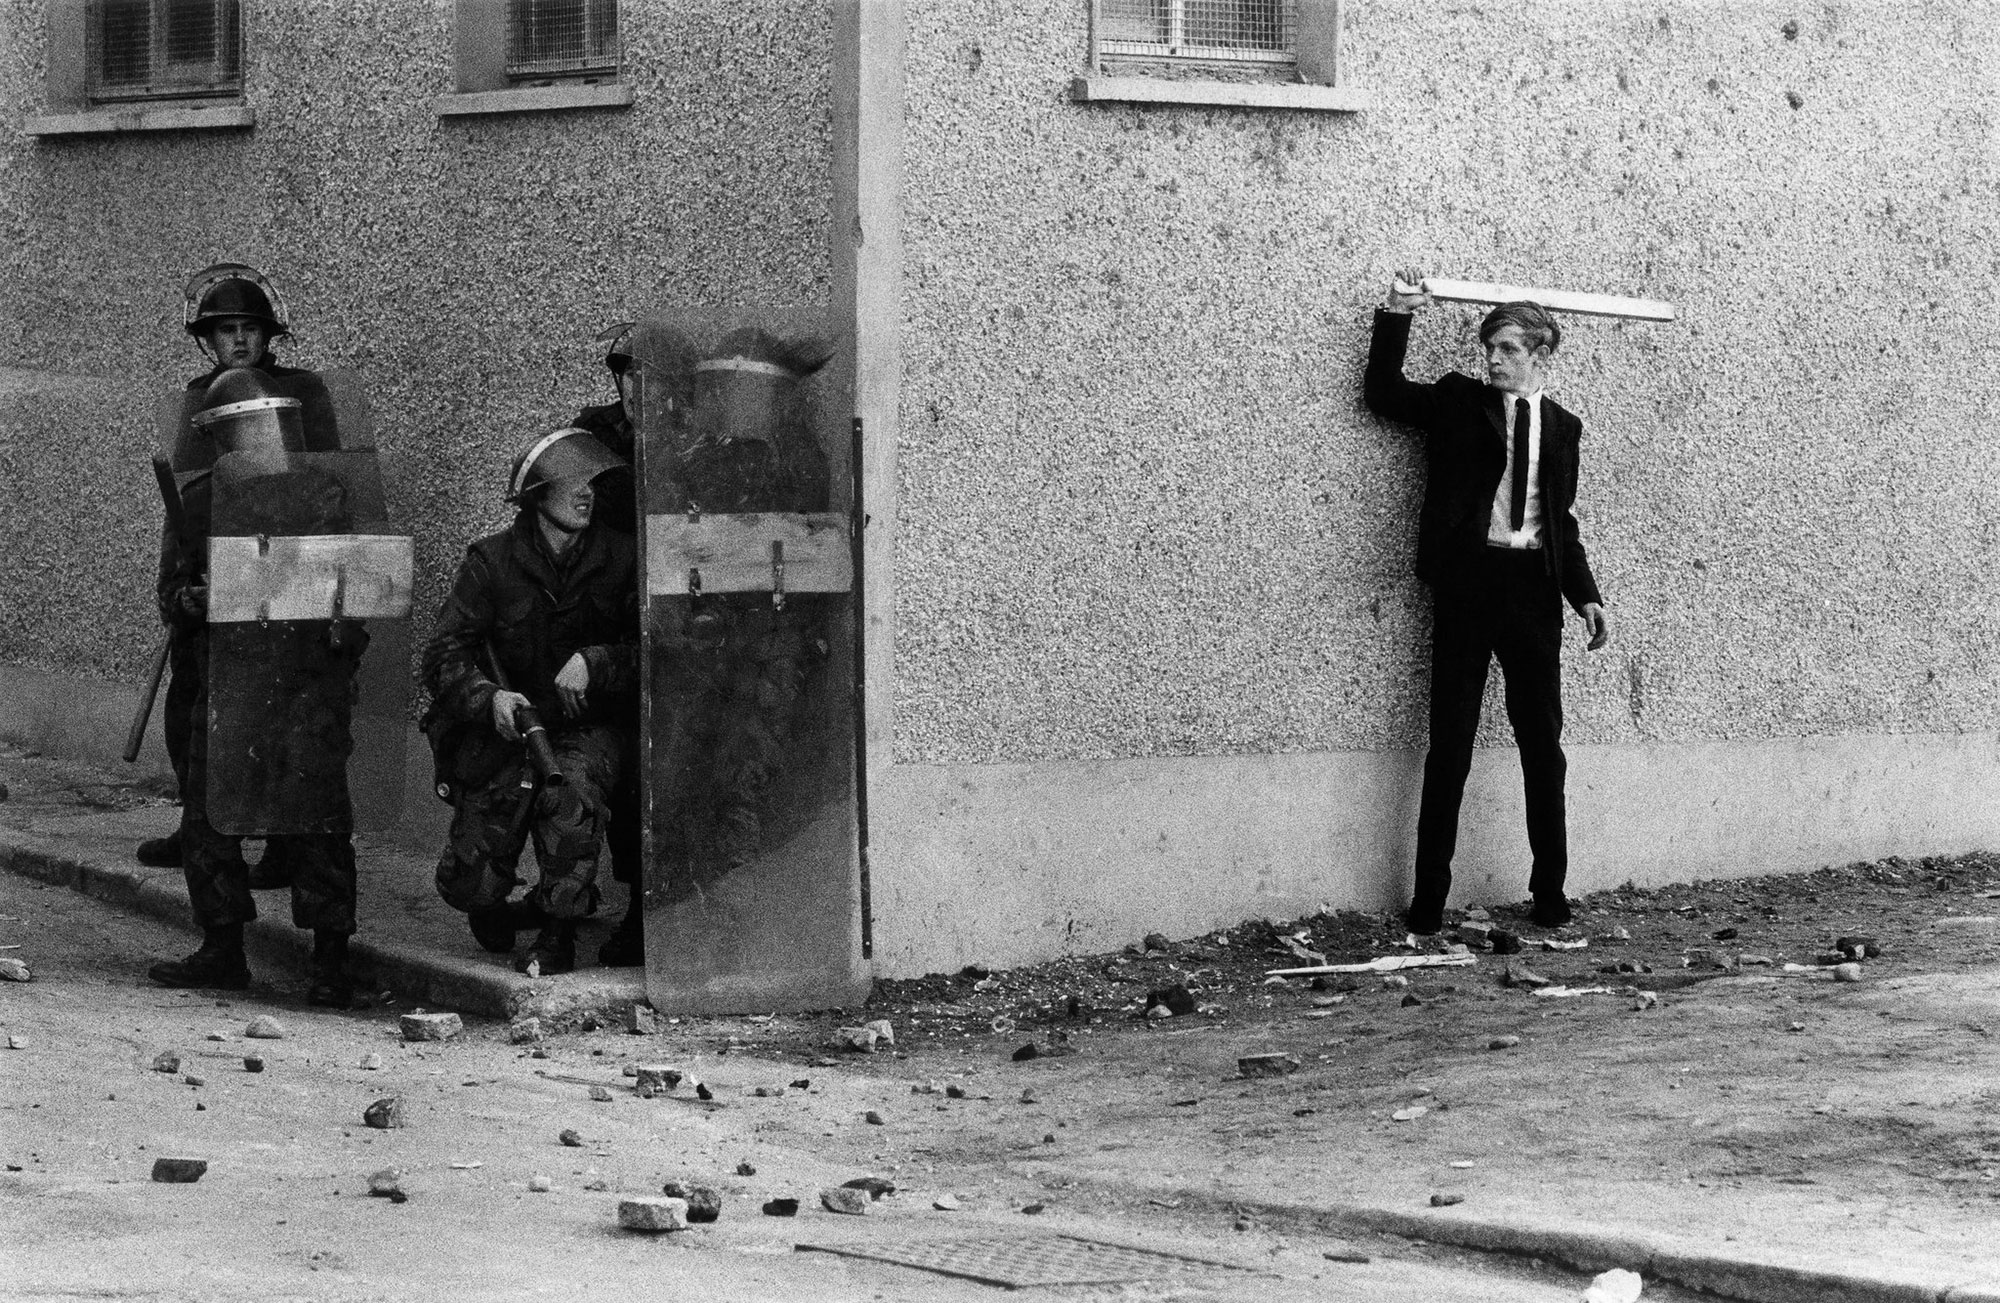 Youths vs British Troops at the height of the Troubles © Don McCullin, Belfast 1971